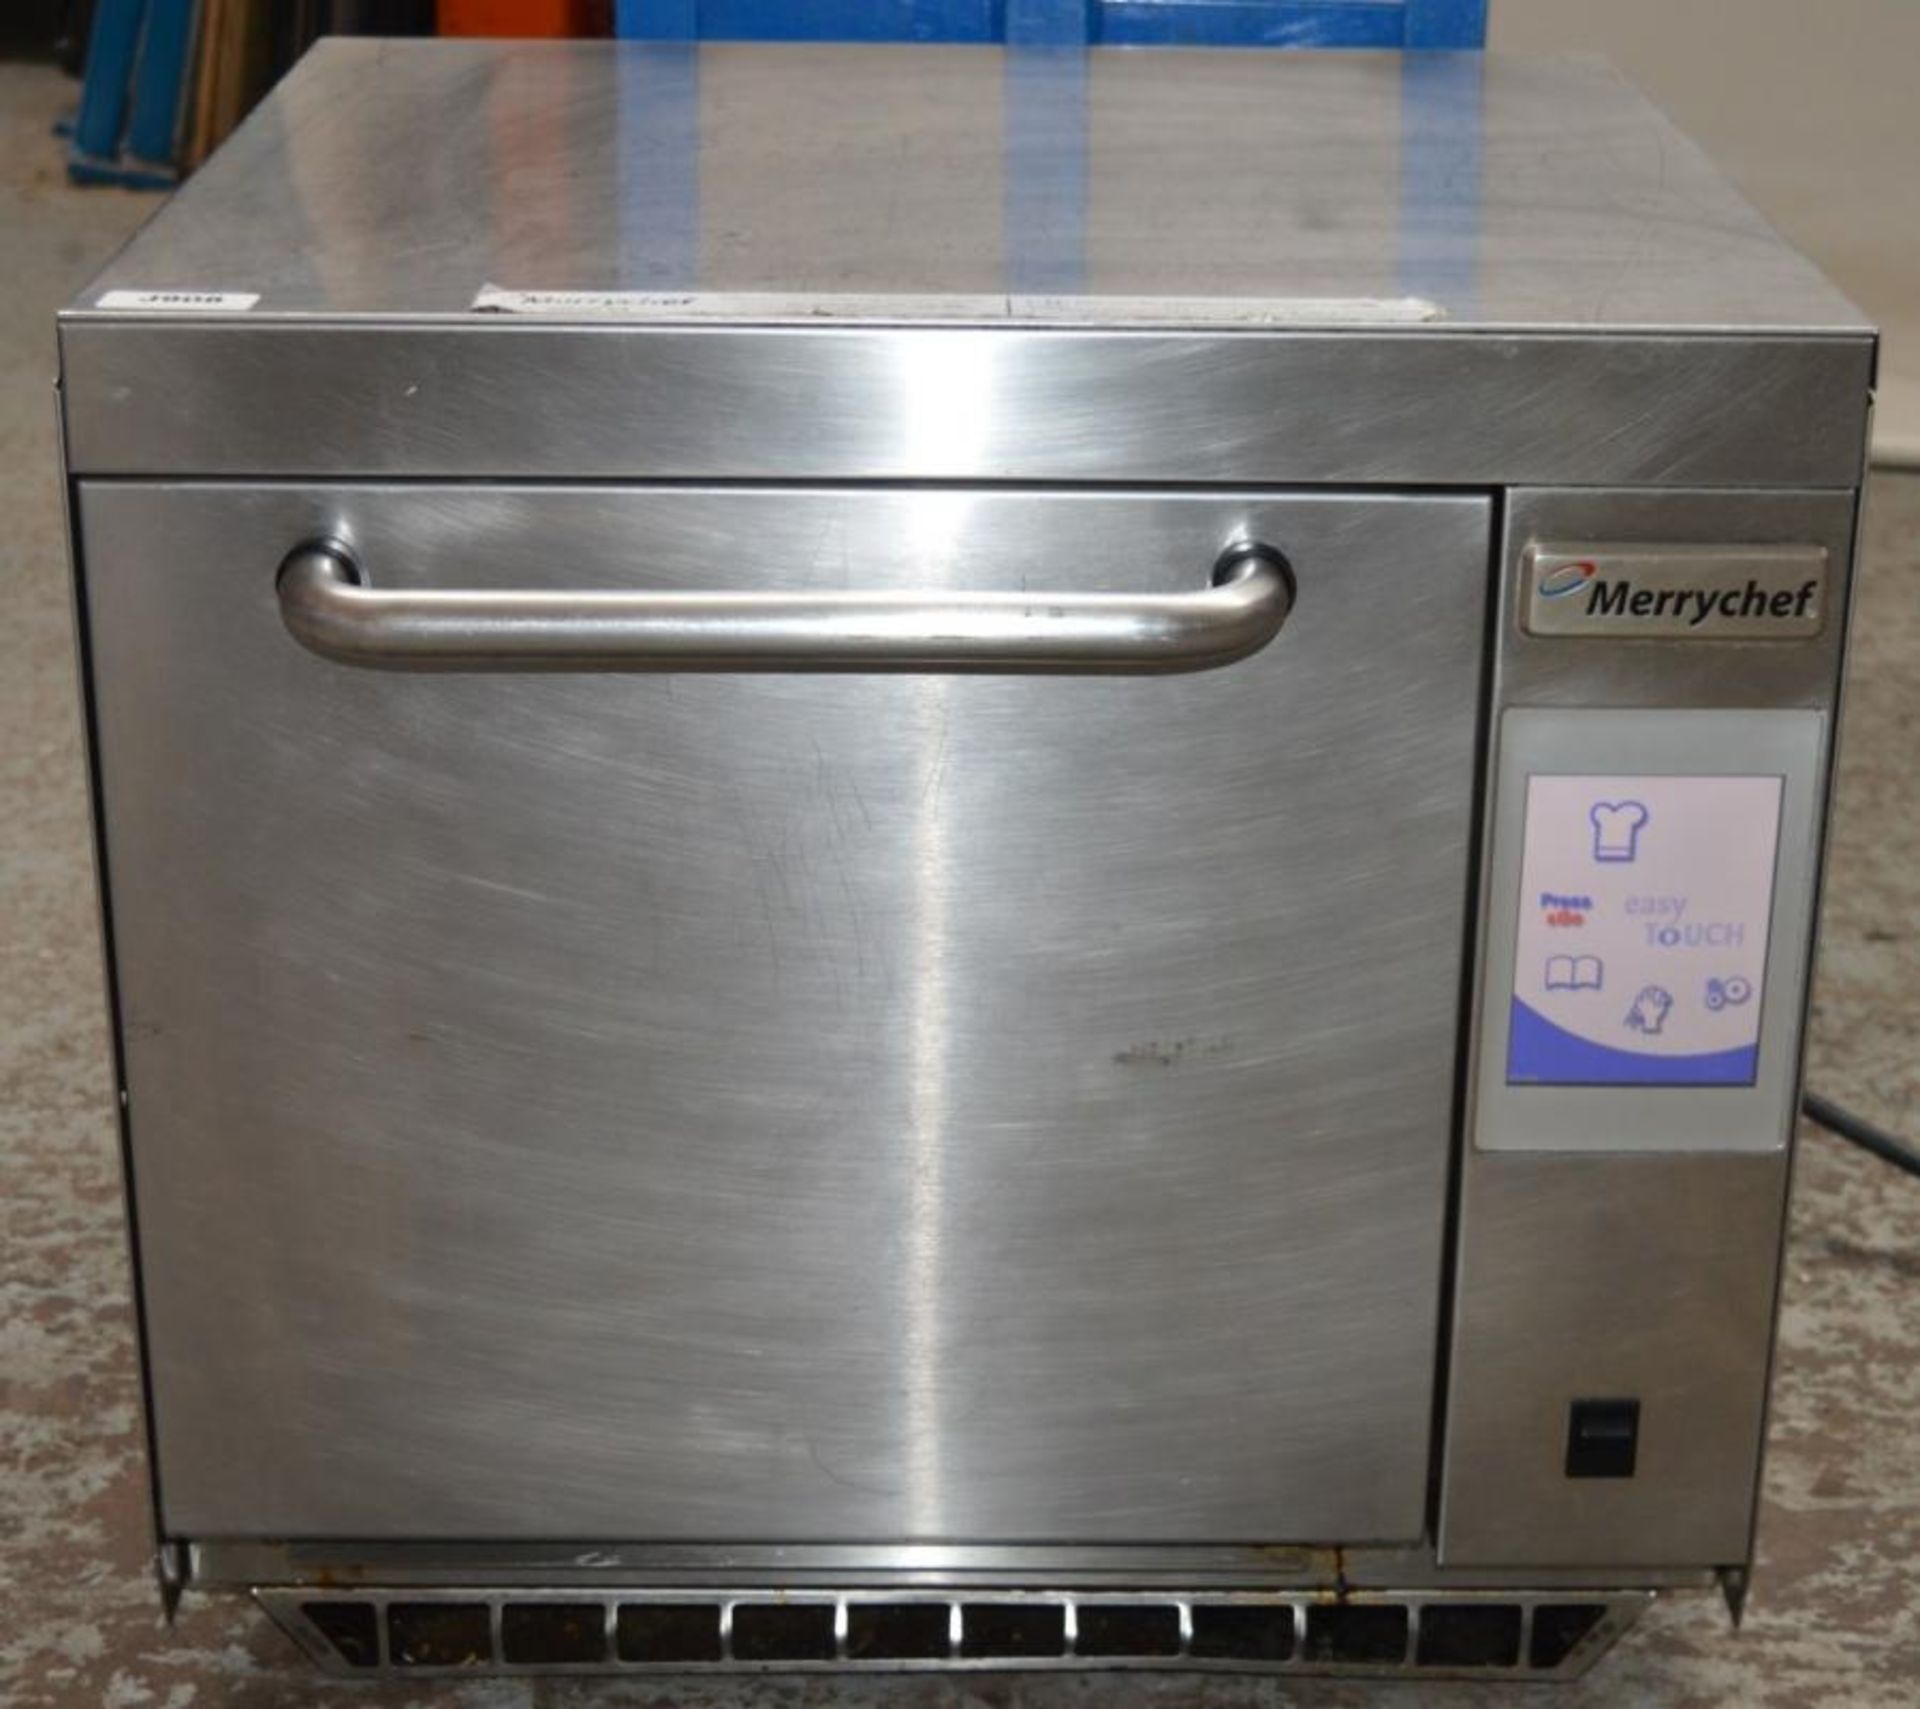 1 x Merrychef Eikon 3 Combination Microwave Oven Features 700w Microwave Output, 3.0kw Convection